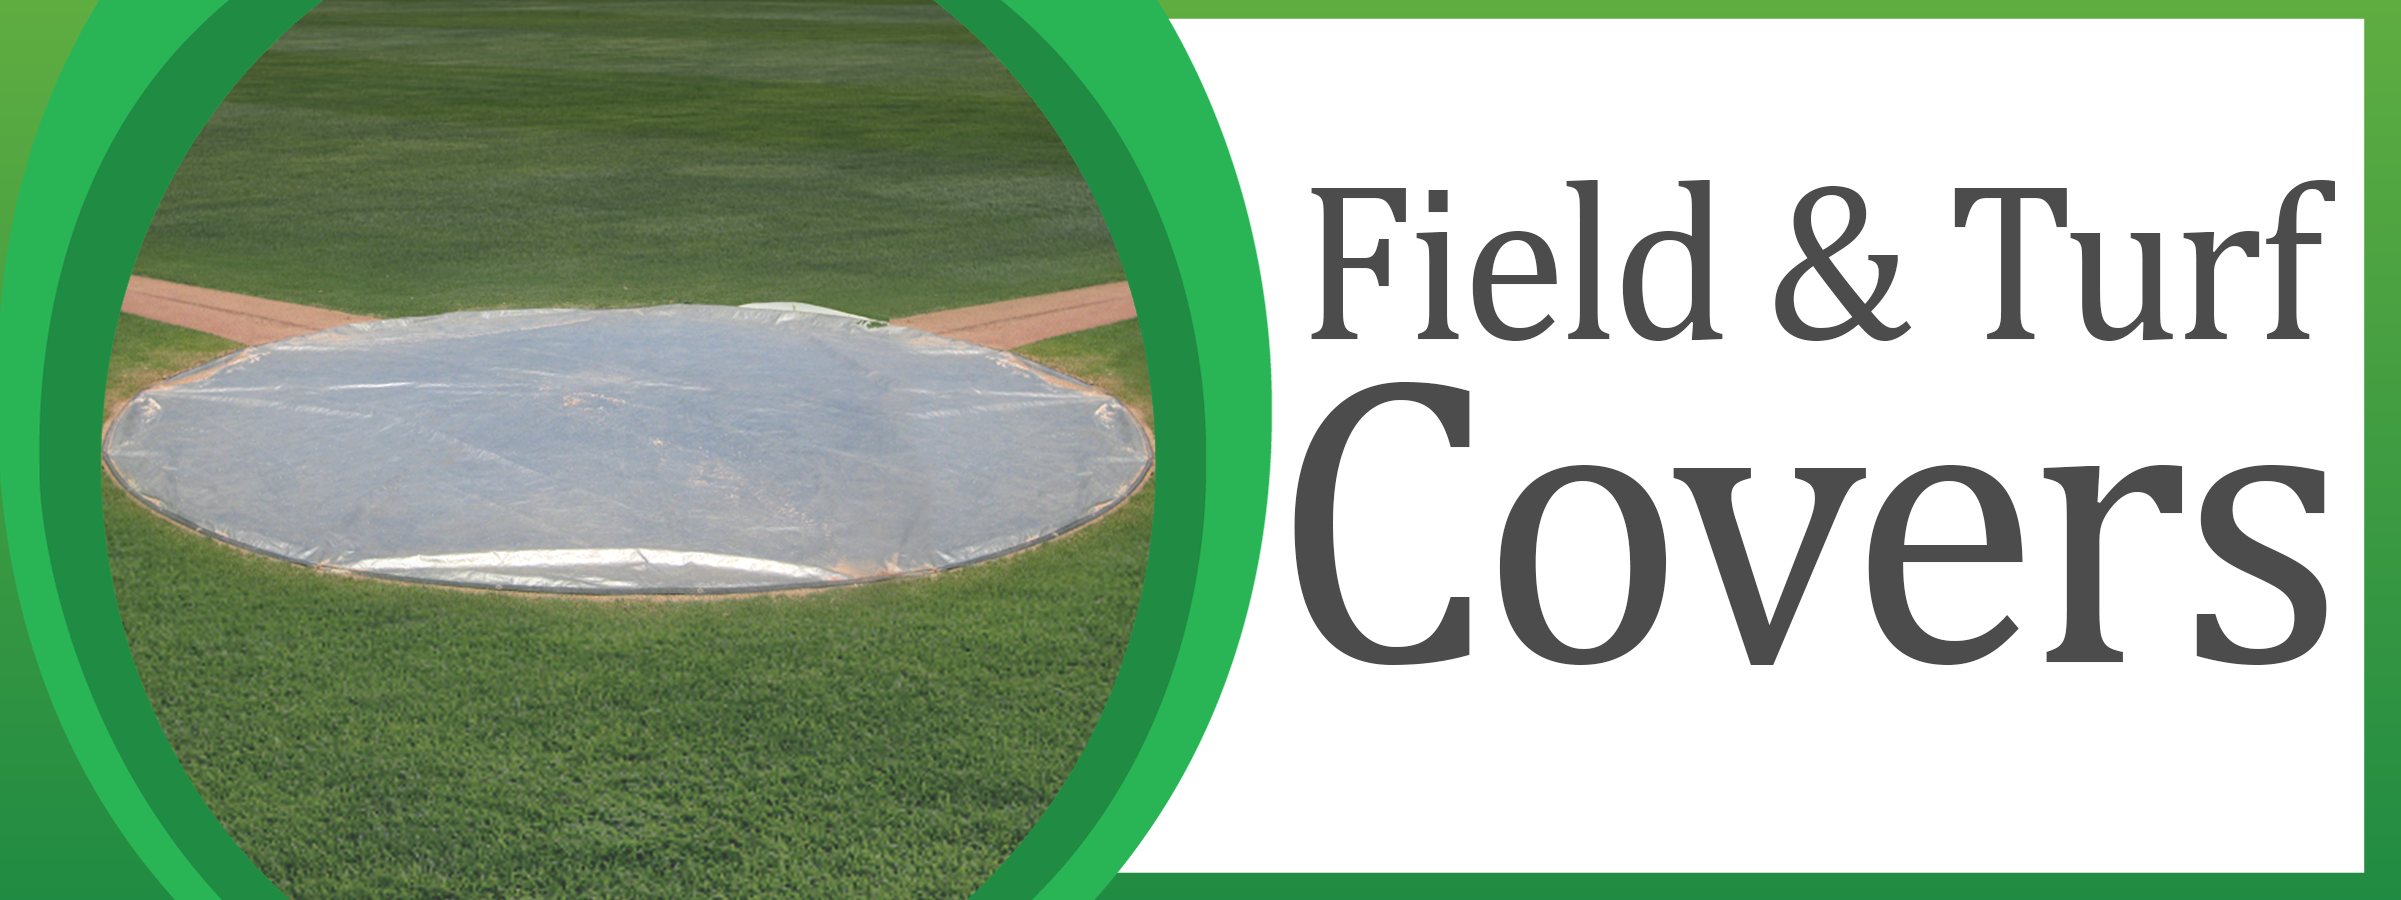 Shop Baseball Fence Store Field Covers and Turf Protection